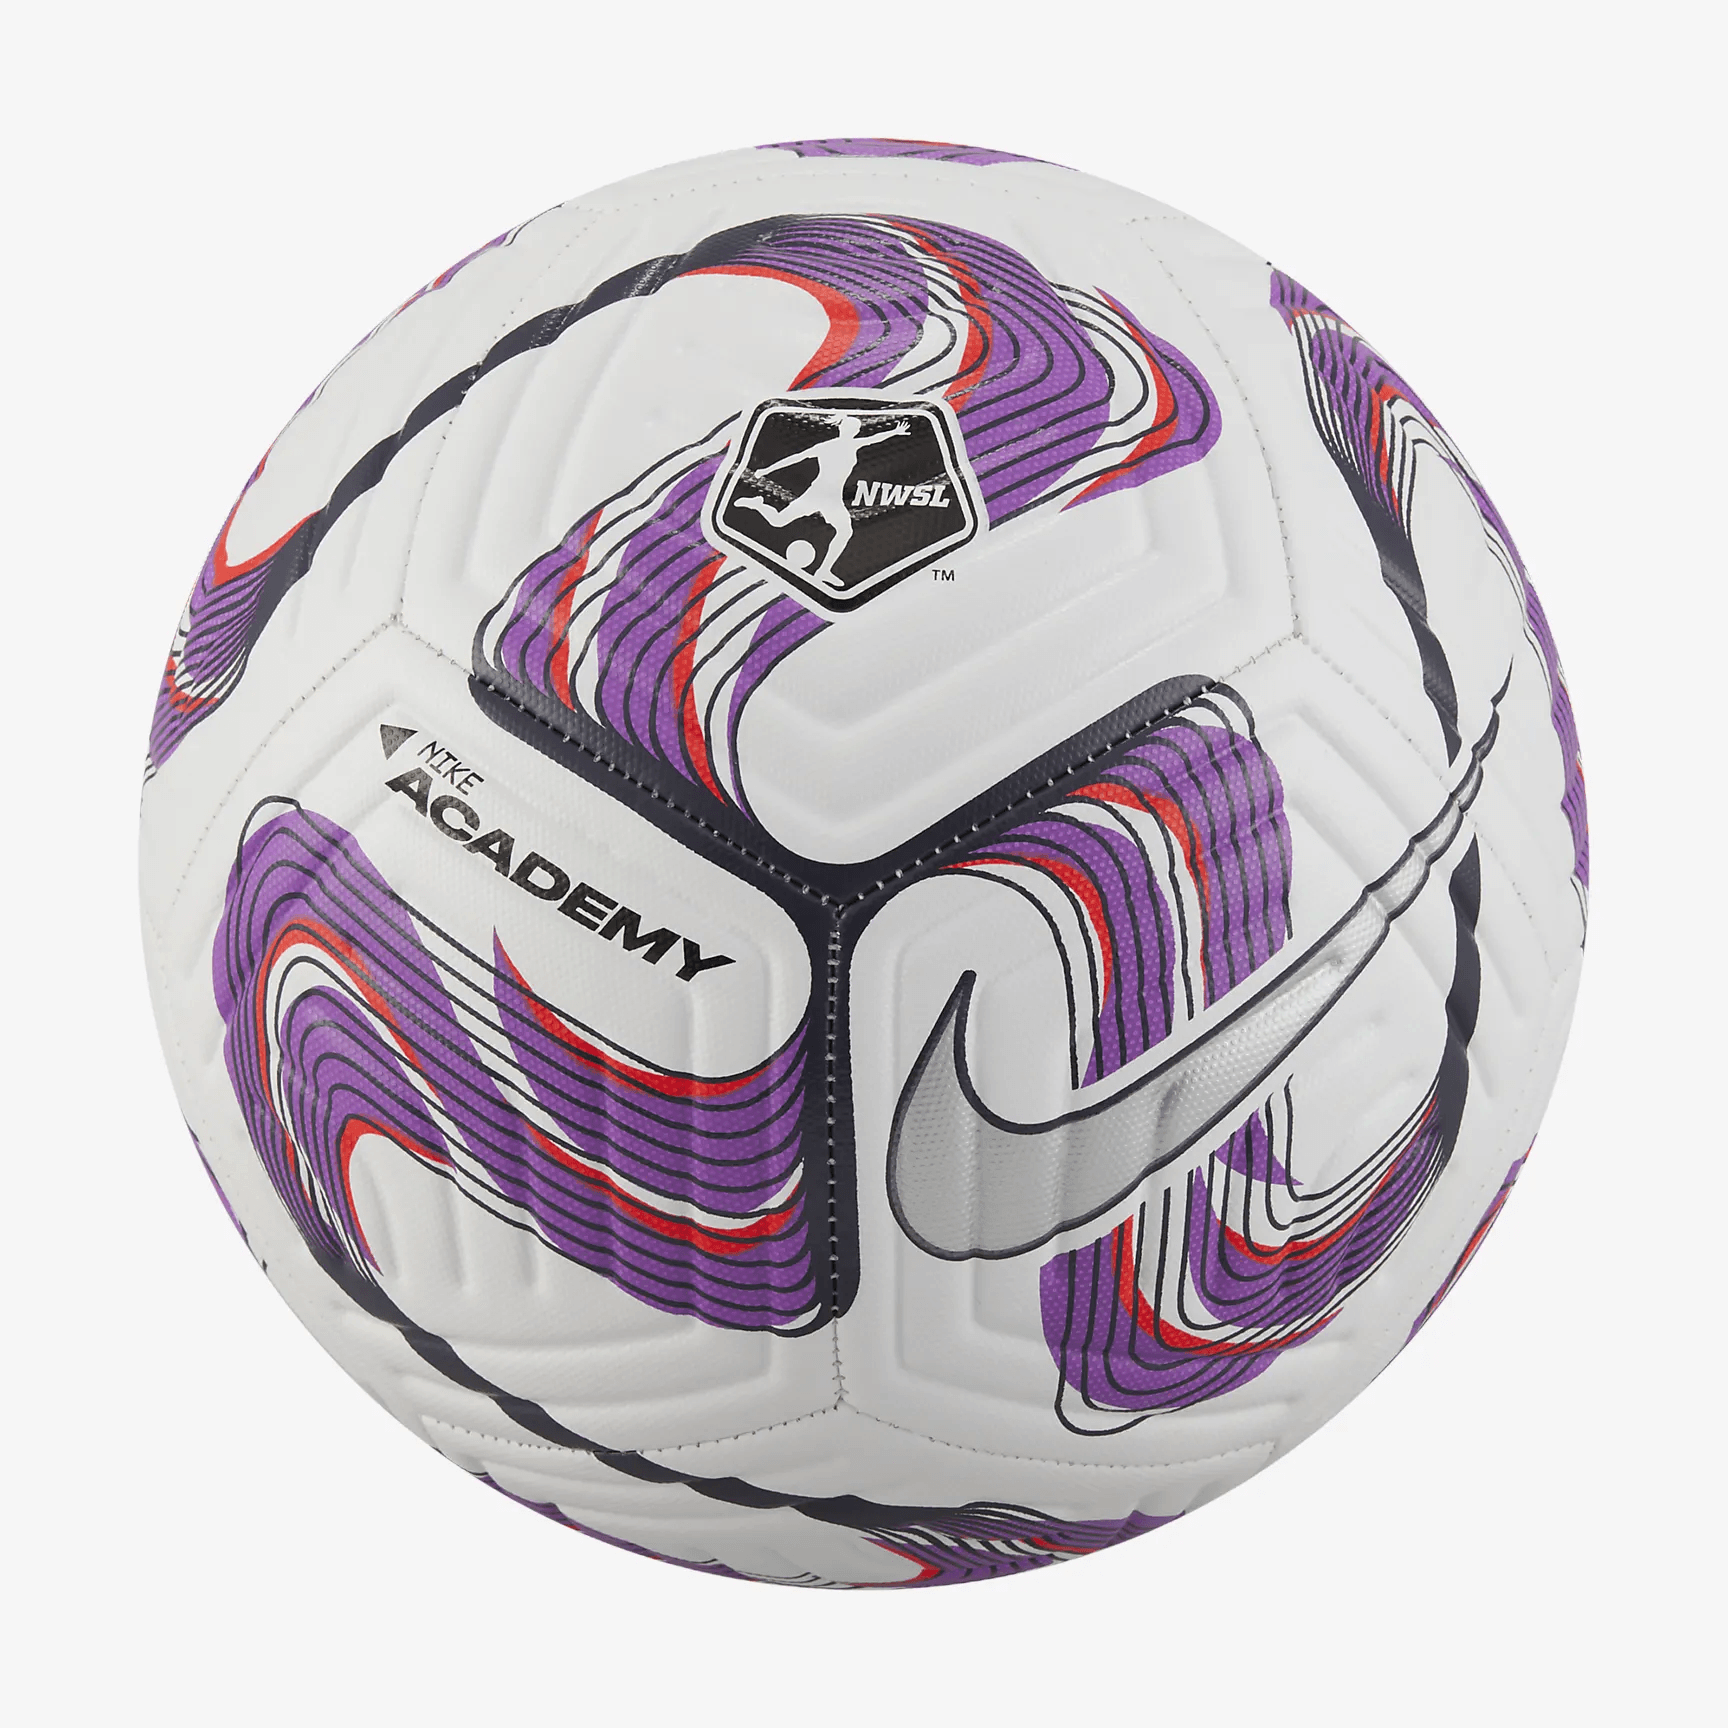 Best Soccer Ball For 8-11 Year Olds (Size 4): Nike NWSL Academy